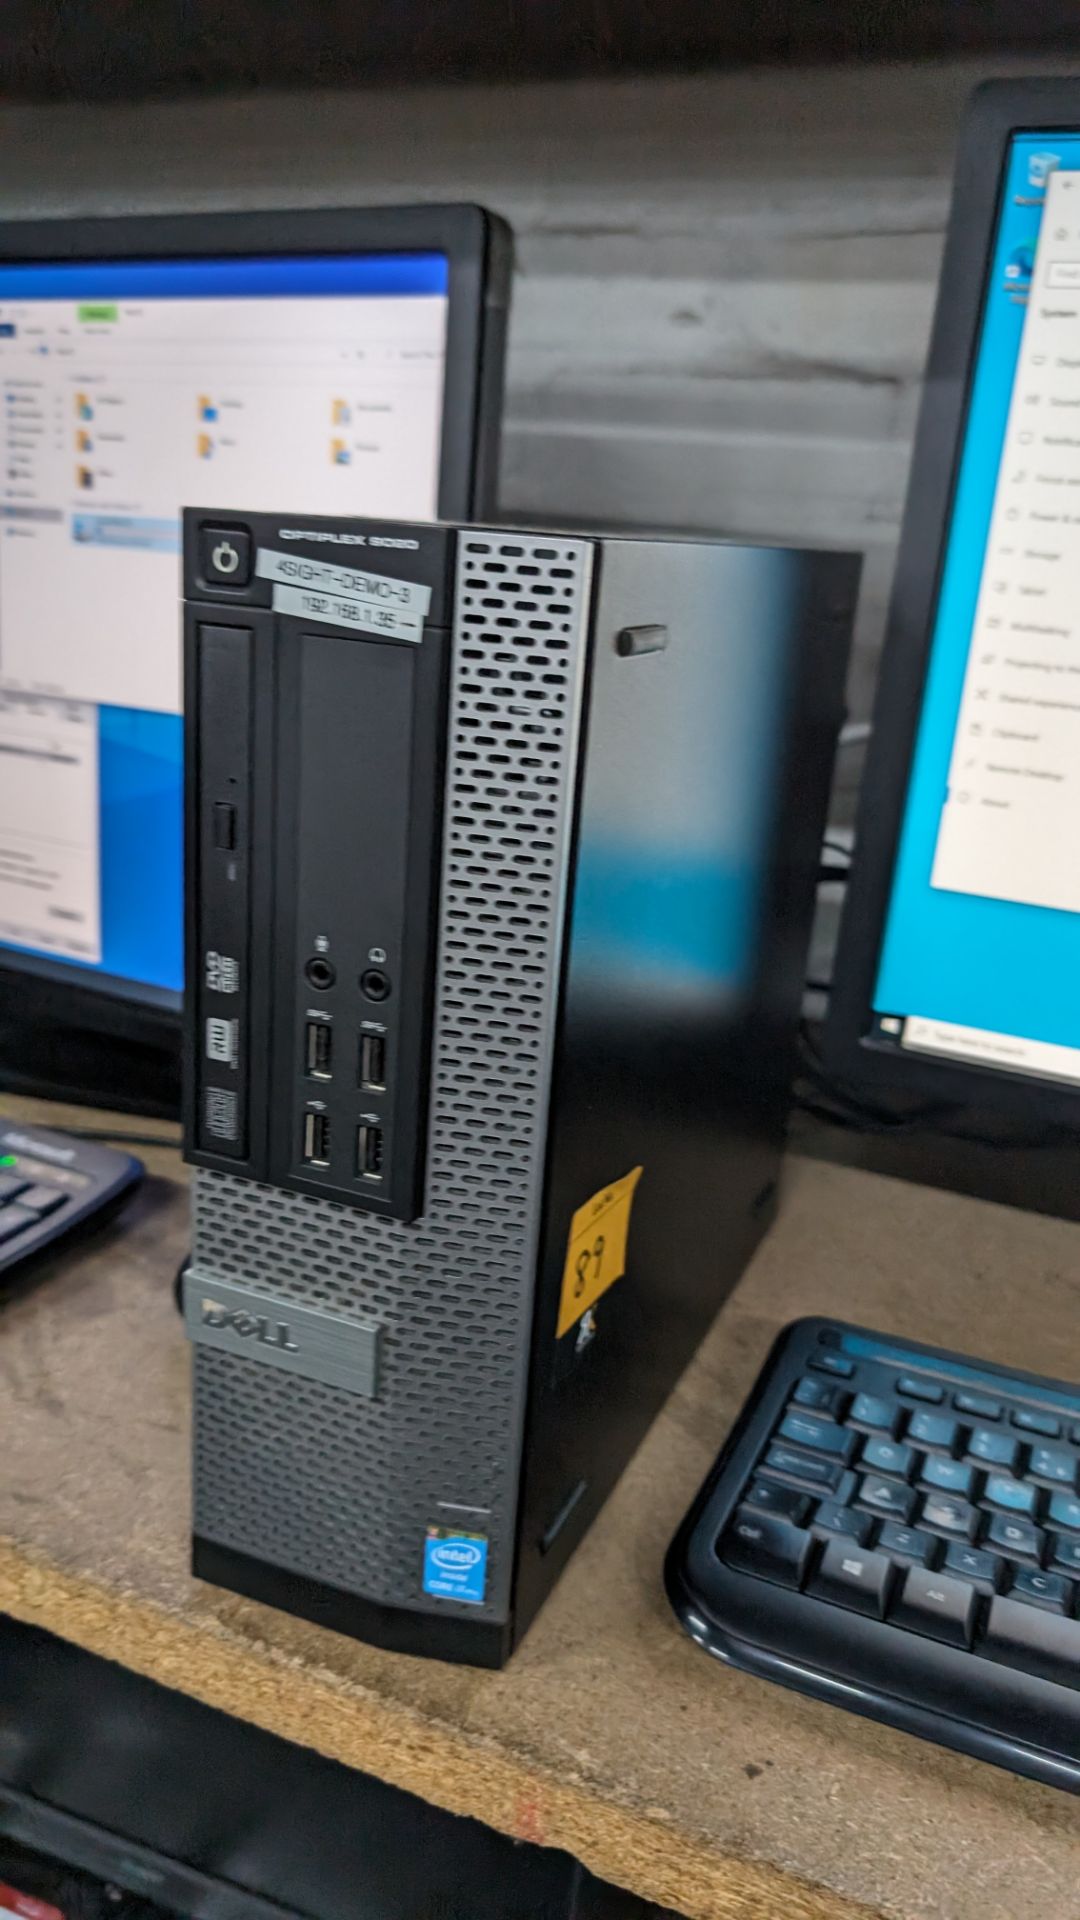 Dell Optiplex 9020 compact tower computer with Intel Core i7 vPro processor, including widescreen mo - Image 4 of 9